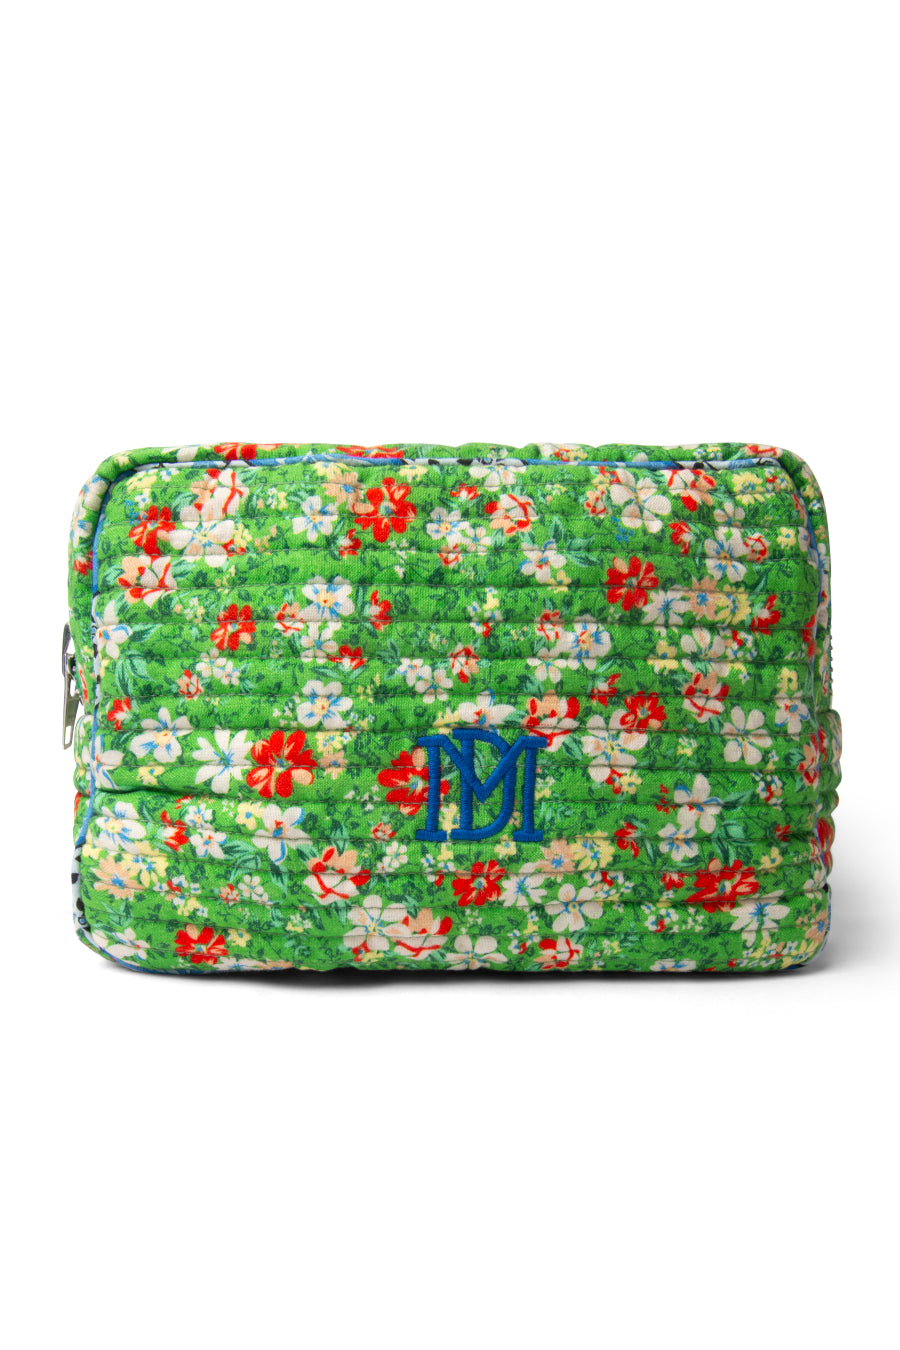 quilted make up bag in floral